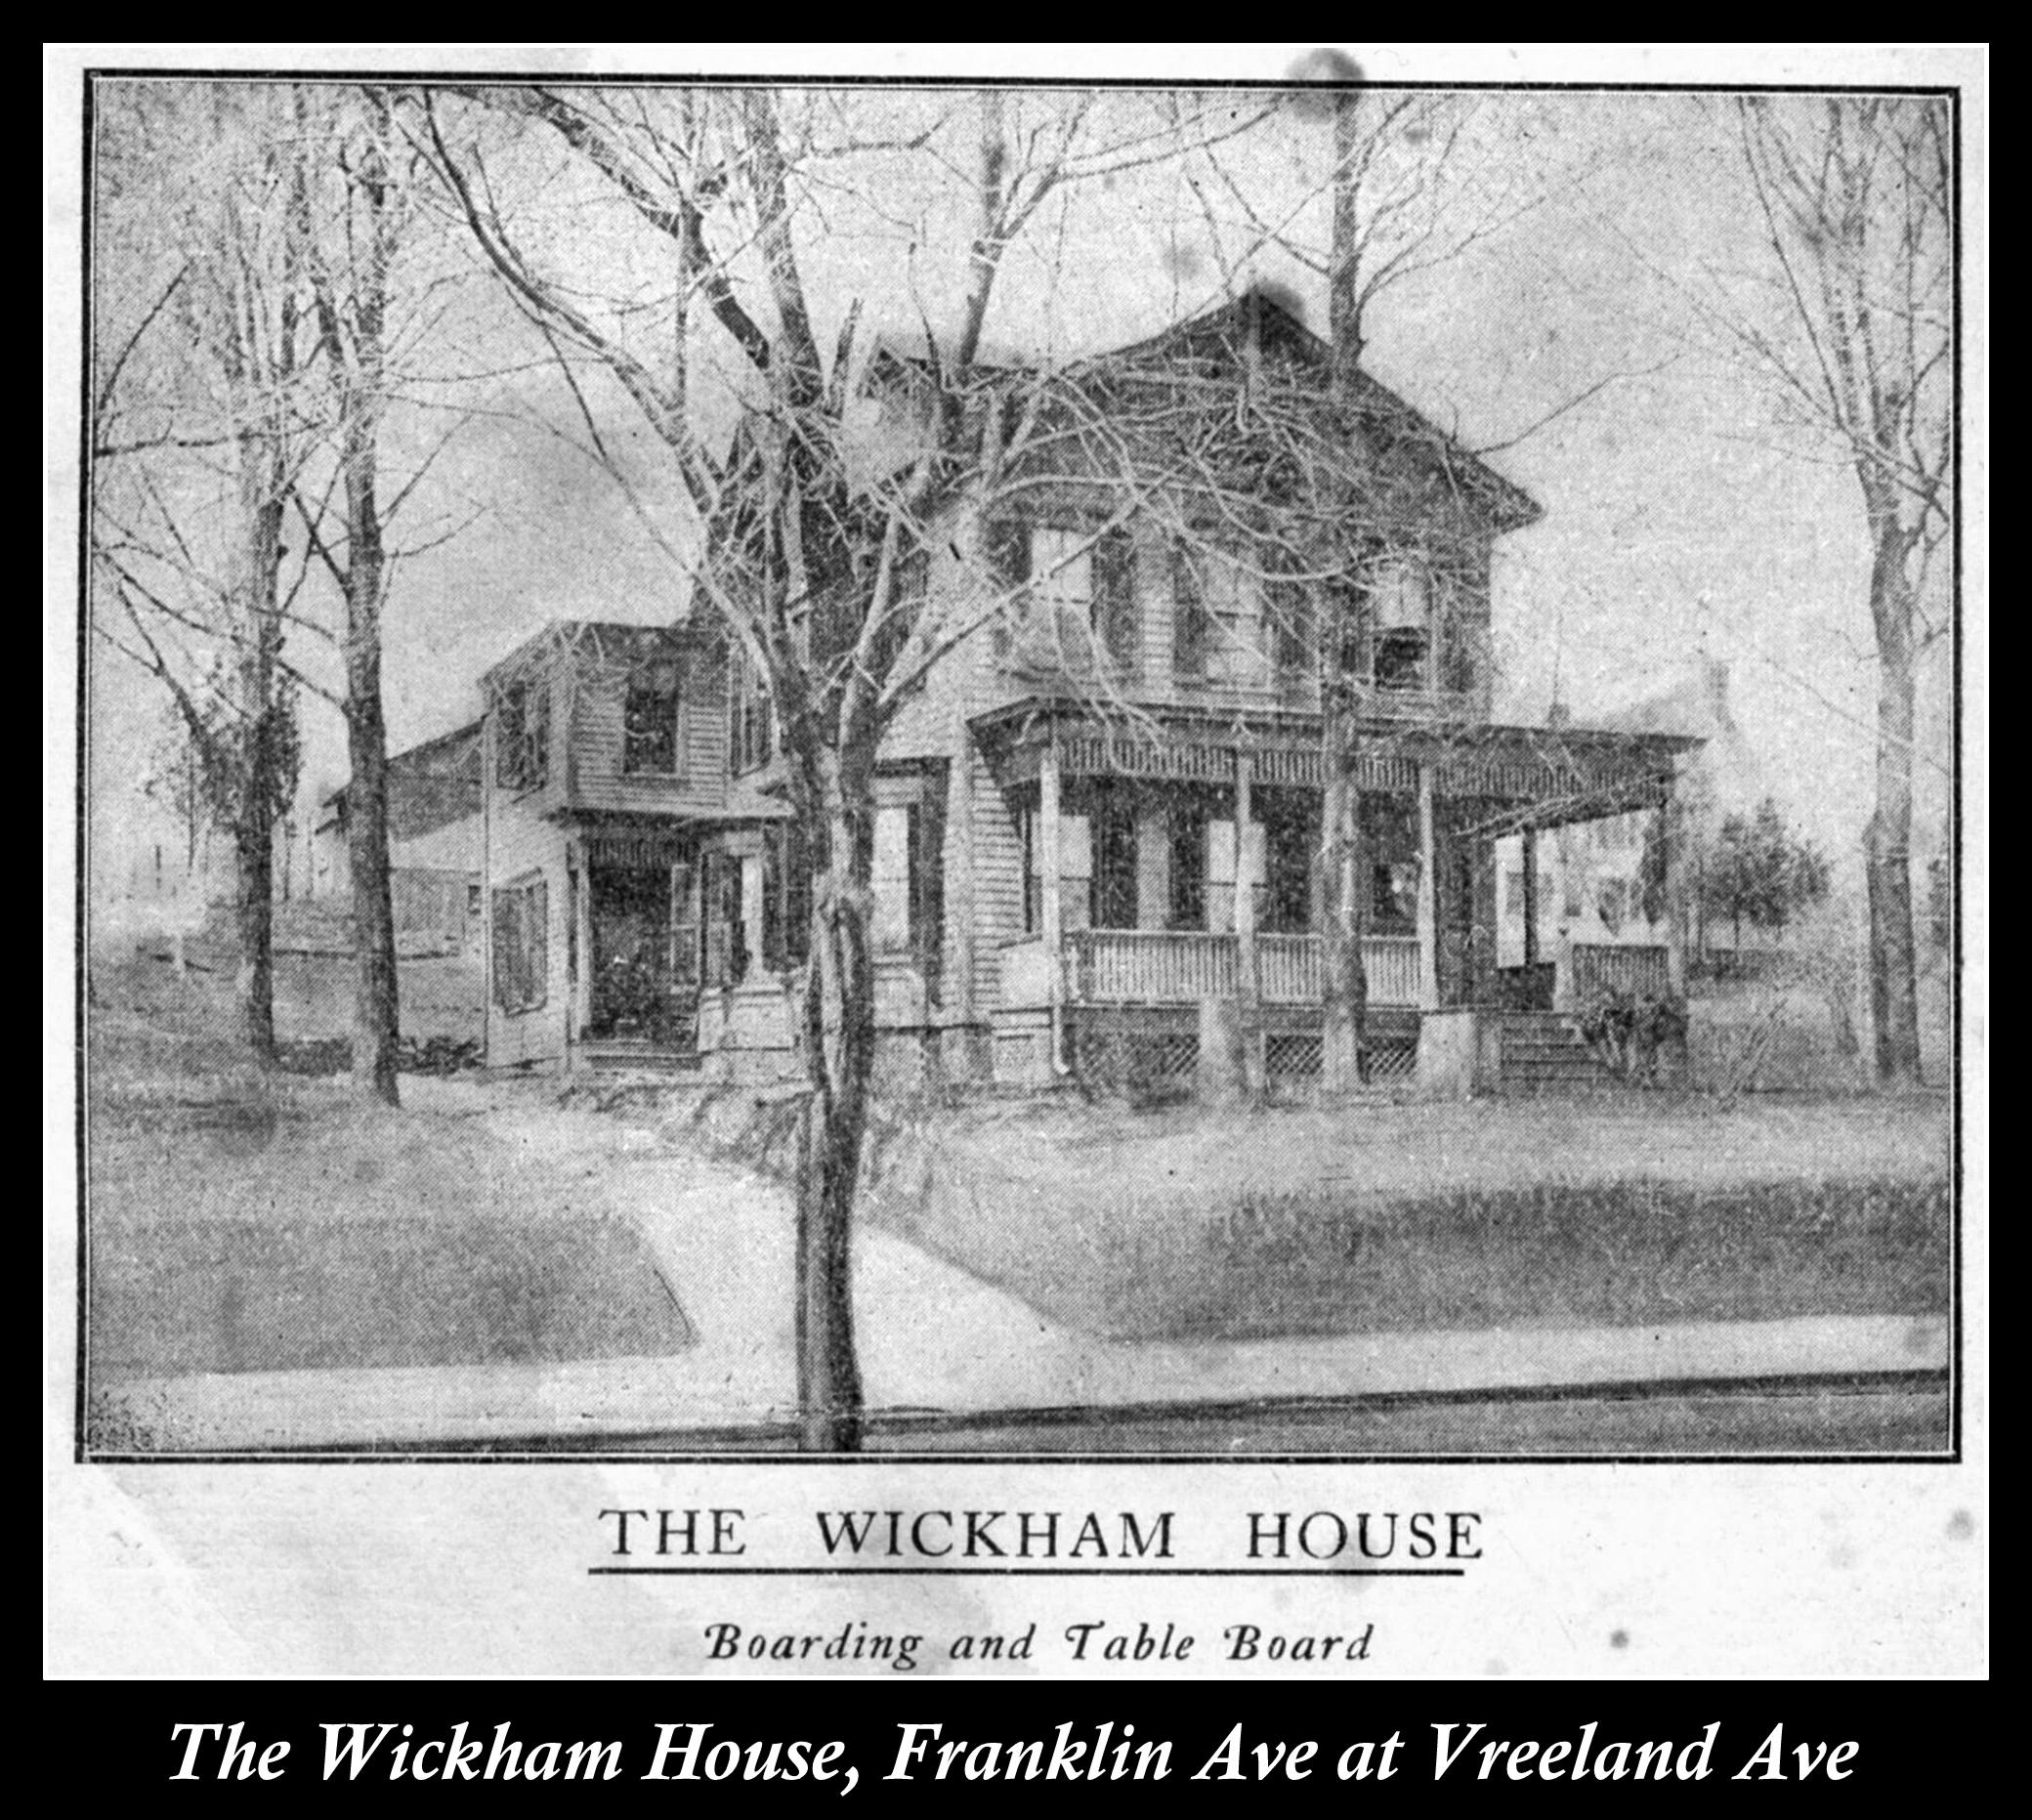 The Wickham House, boarding and table, Nutley NJ